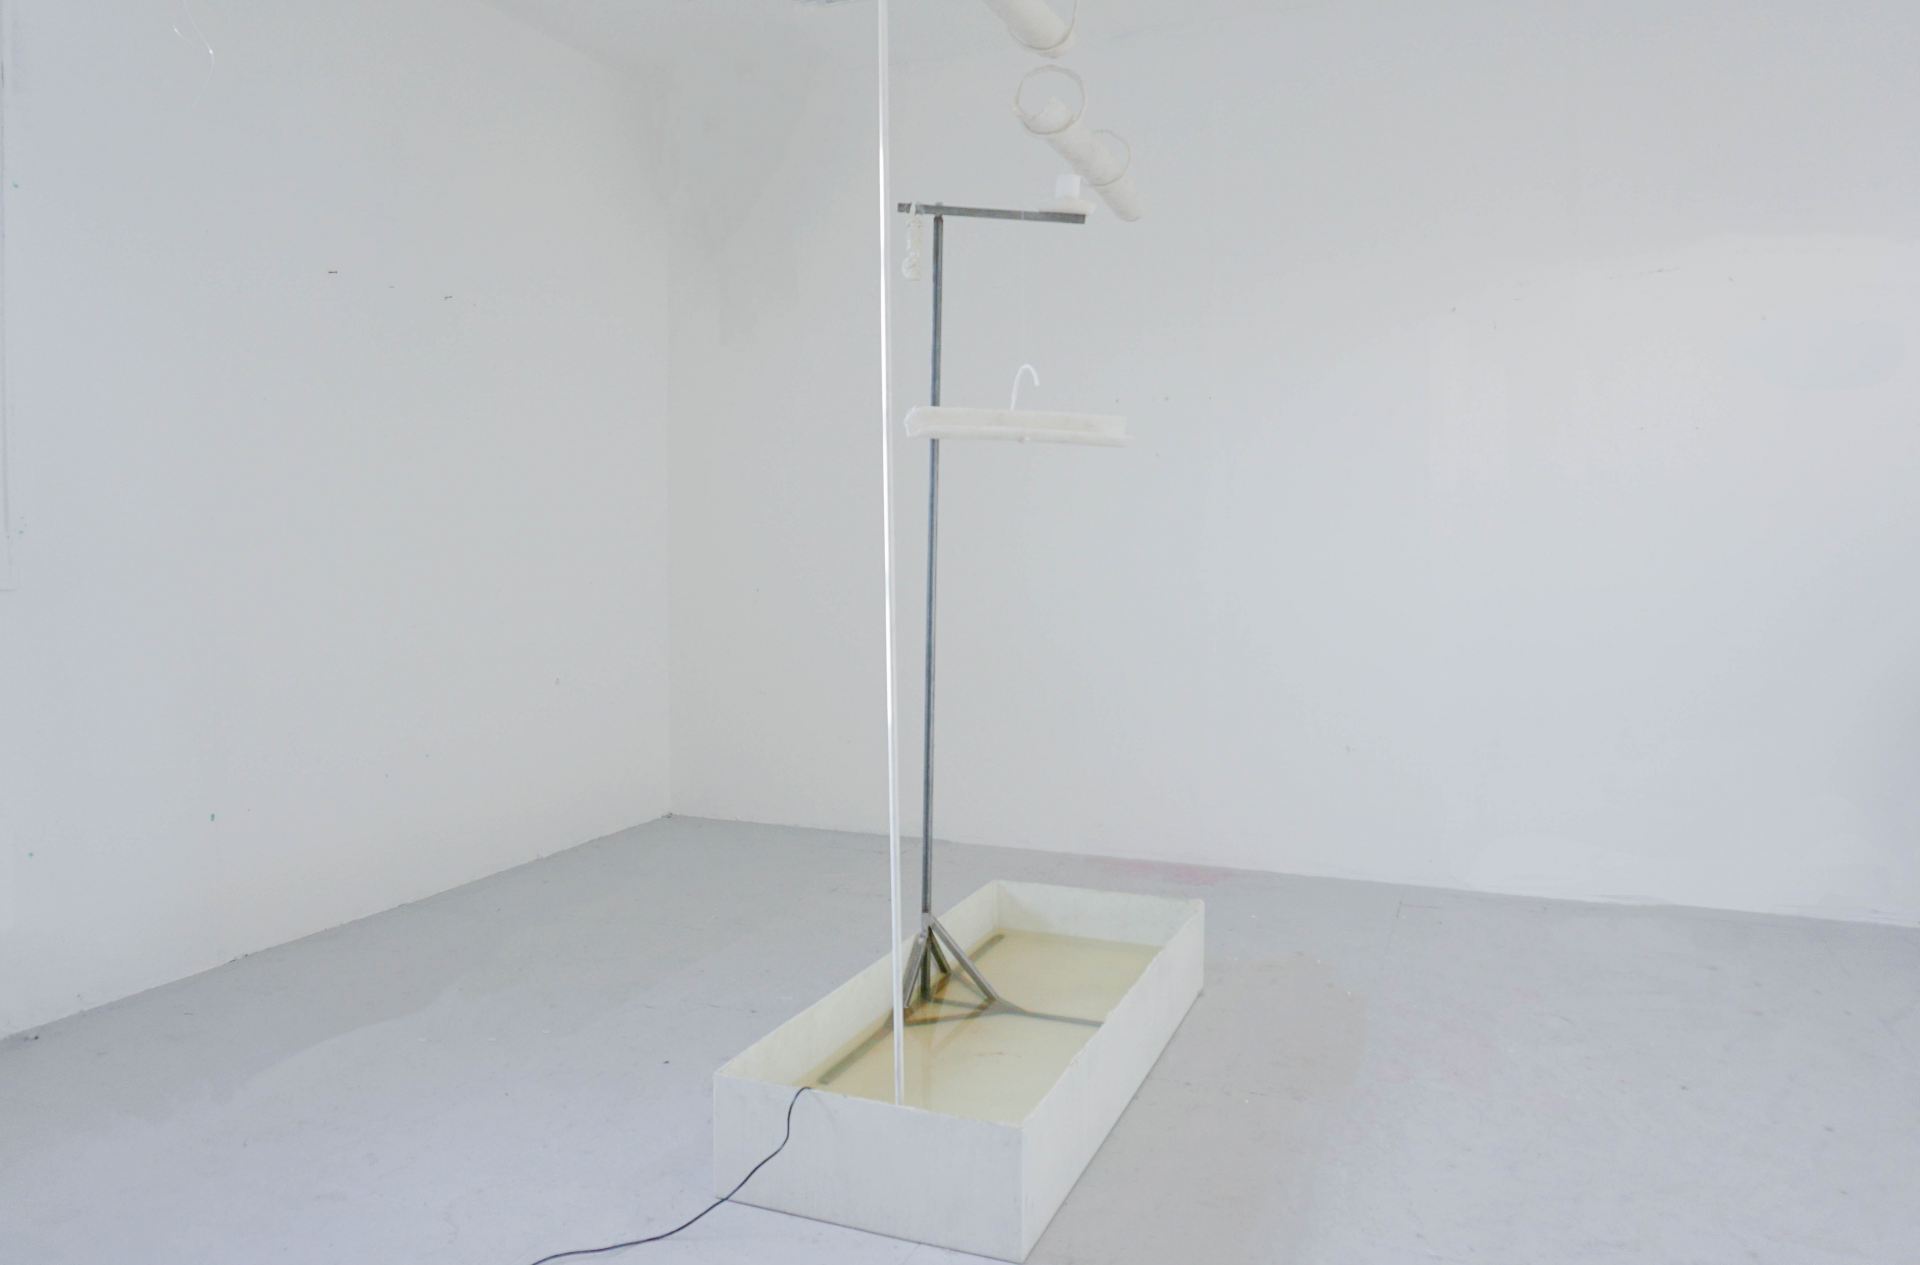 A sculptural water feature made using wax tubes standing in a white room.